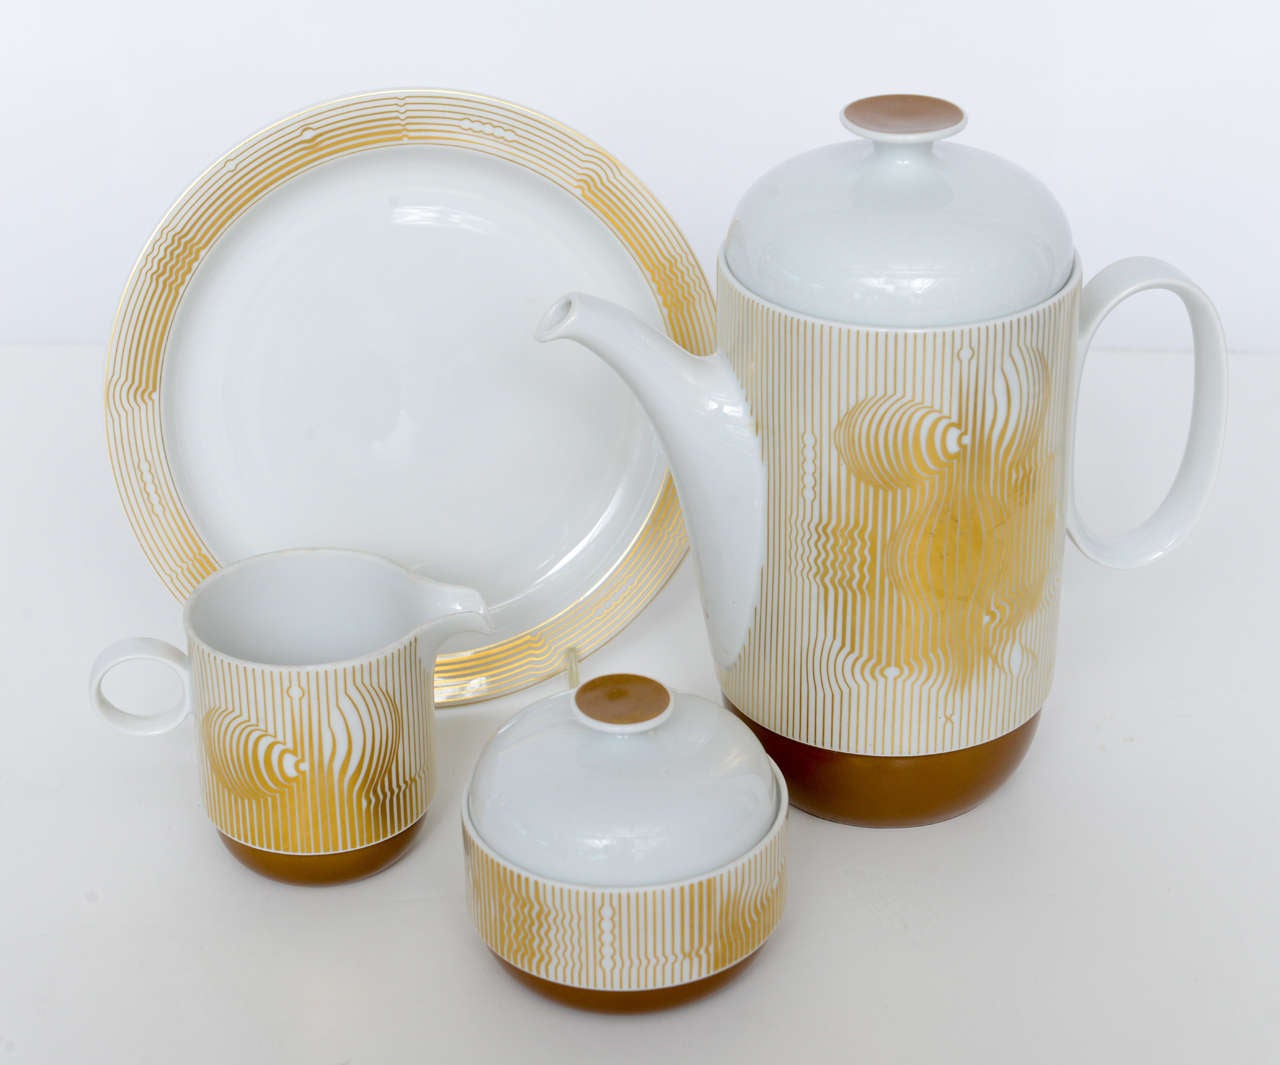 It's such a treat to look at this gorgeous after-dinner set designed by Victor Vasarely for Rosenthal Studio-Line, who needs dessert?! Service consists of coffee pot, creamer, sugar bowl, 6 cups and saucers, and 6 dessert plates in near-mint